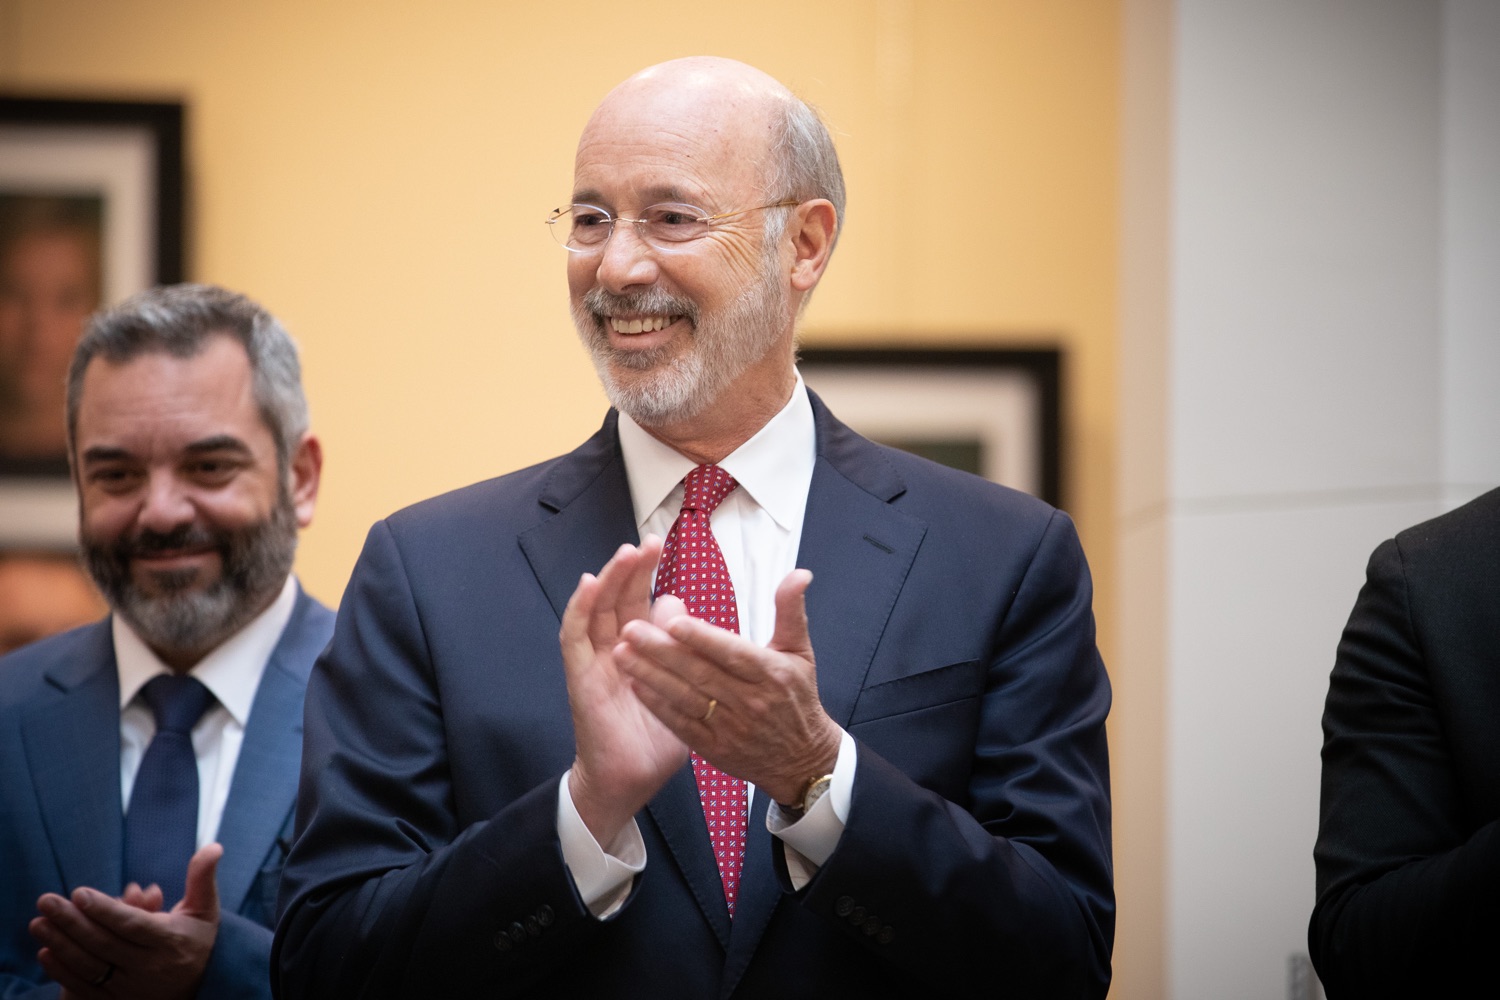 Pennsylvania Governor Tom Wolf meeting with students at the robotics demonstration.  Celebrating the success of the PAsmart workforce development program to create educational opportunities at schools across the commonwealth, Governor Tom Wolf welcomed more than 50 students from the Pennsylvania Rural Robotics Initiative to the Capitol today. The students from nine western Pennsylvania school districts showcased their skills in coding, robotics and drone technology. The Wolf administration awarded the initiative a $299,000 PAsmart Advancing Grant earlier this year. Harrisburg, PA  Tuesday, November 12, 2019<br><a href="https://filesource.amperwave.net/commonwealthofpa/photo/17587_gov_pasmart_rural_robotics_dz_003.jpg" target="_blank">⇣ Download Photo</a>